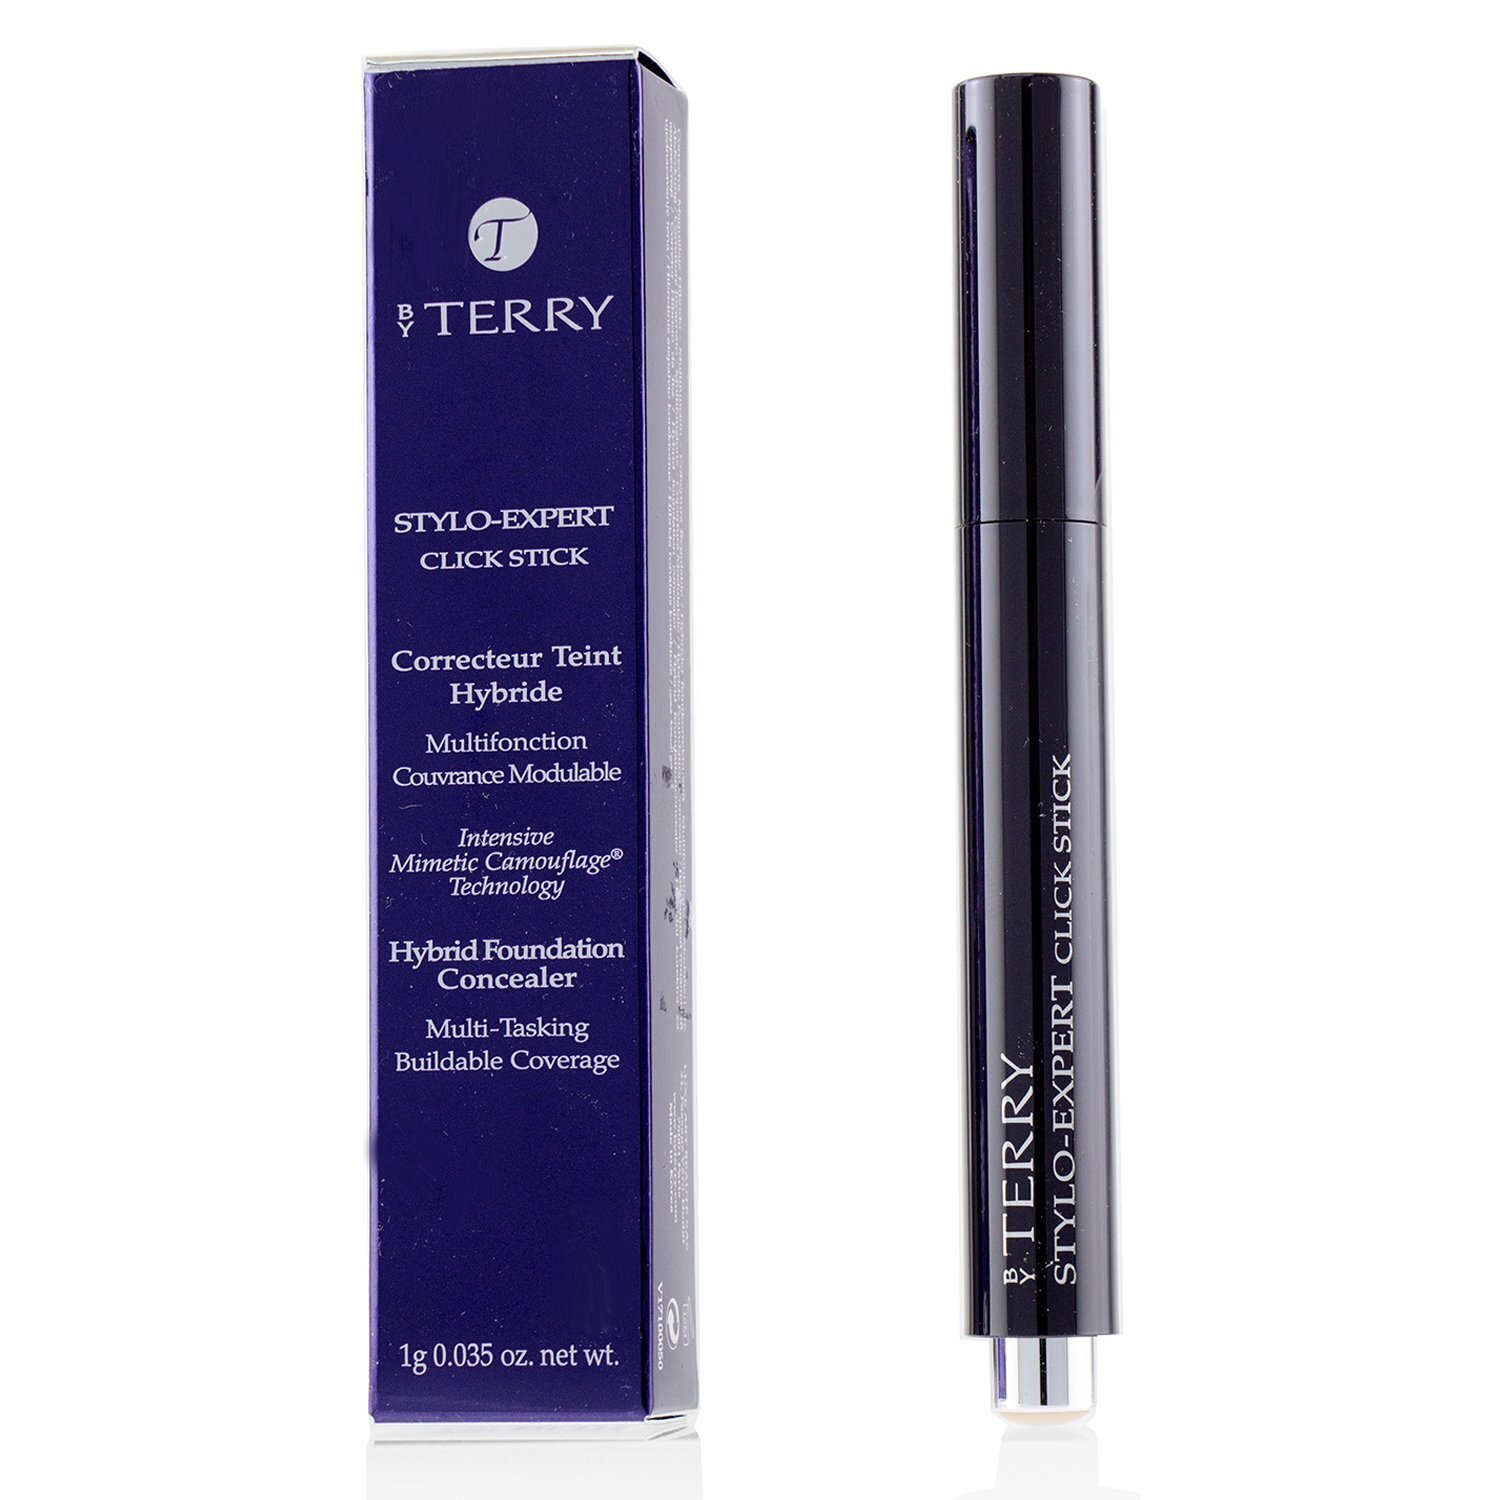 Hybrid stick. Консилер-корректор by Terry Stylo-Expert click Stick. By Terry click Stick Corrector 4. Terry Hybrid Foundation concealer. The by Terry Foundation и консилер.